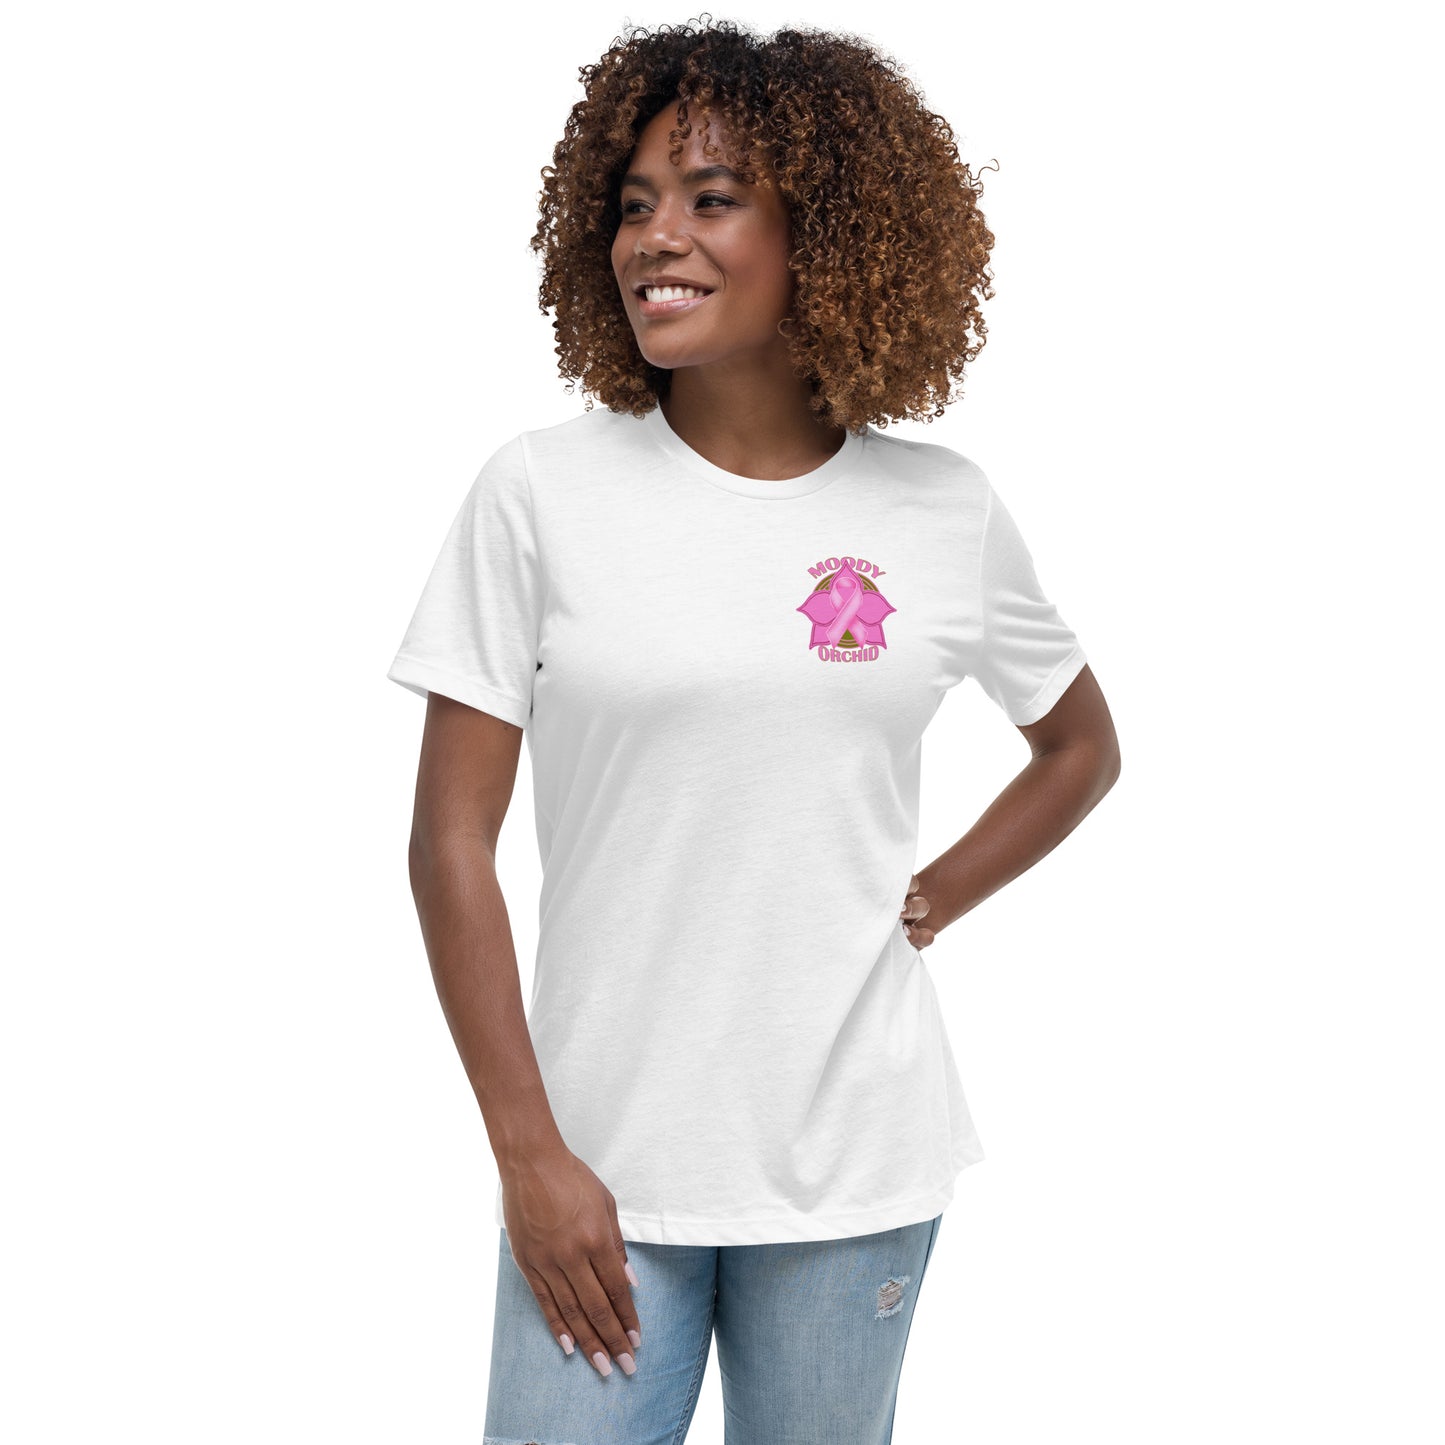 Moody Orchid Hope & Believe 2 Relaxed Women's Tee